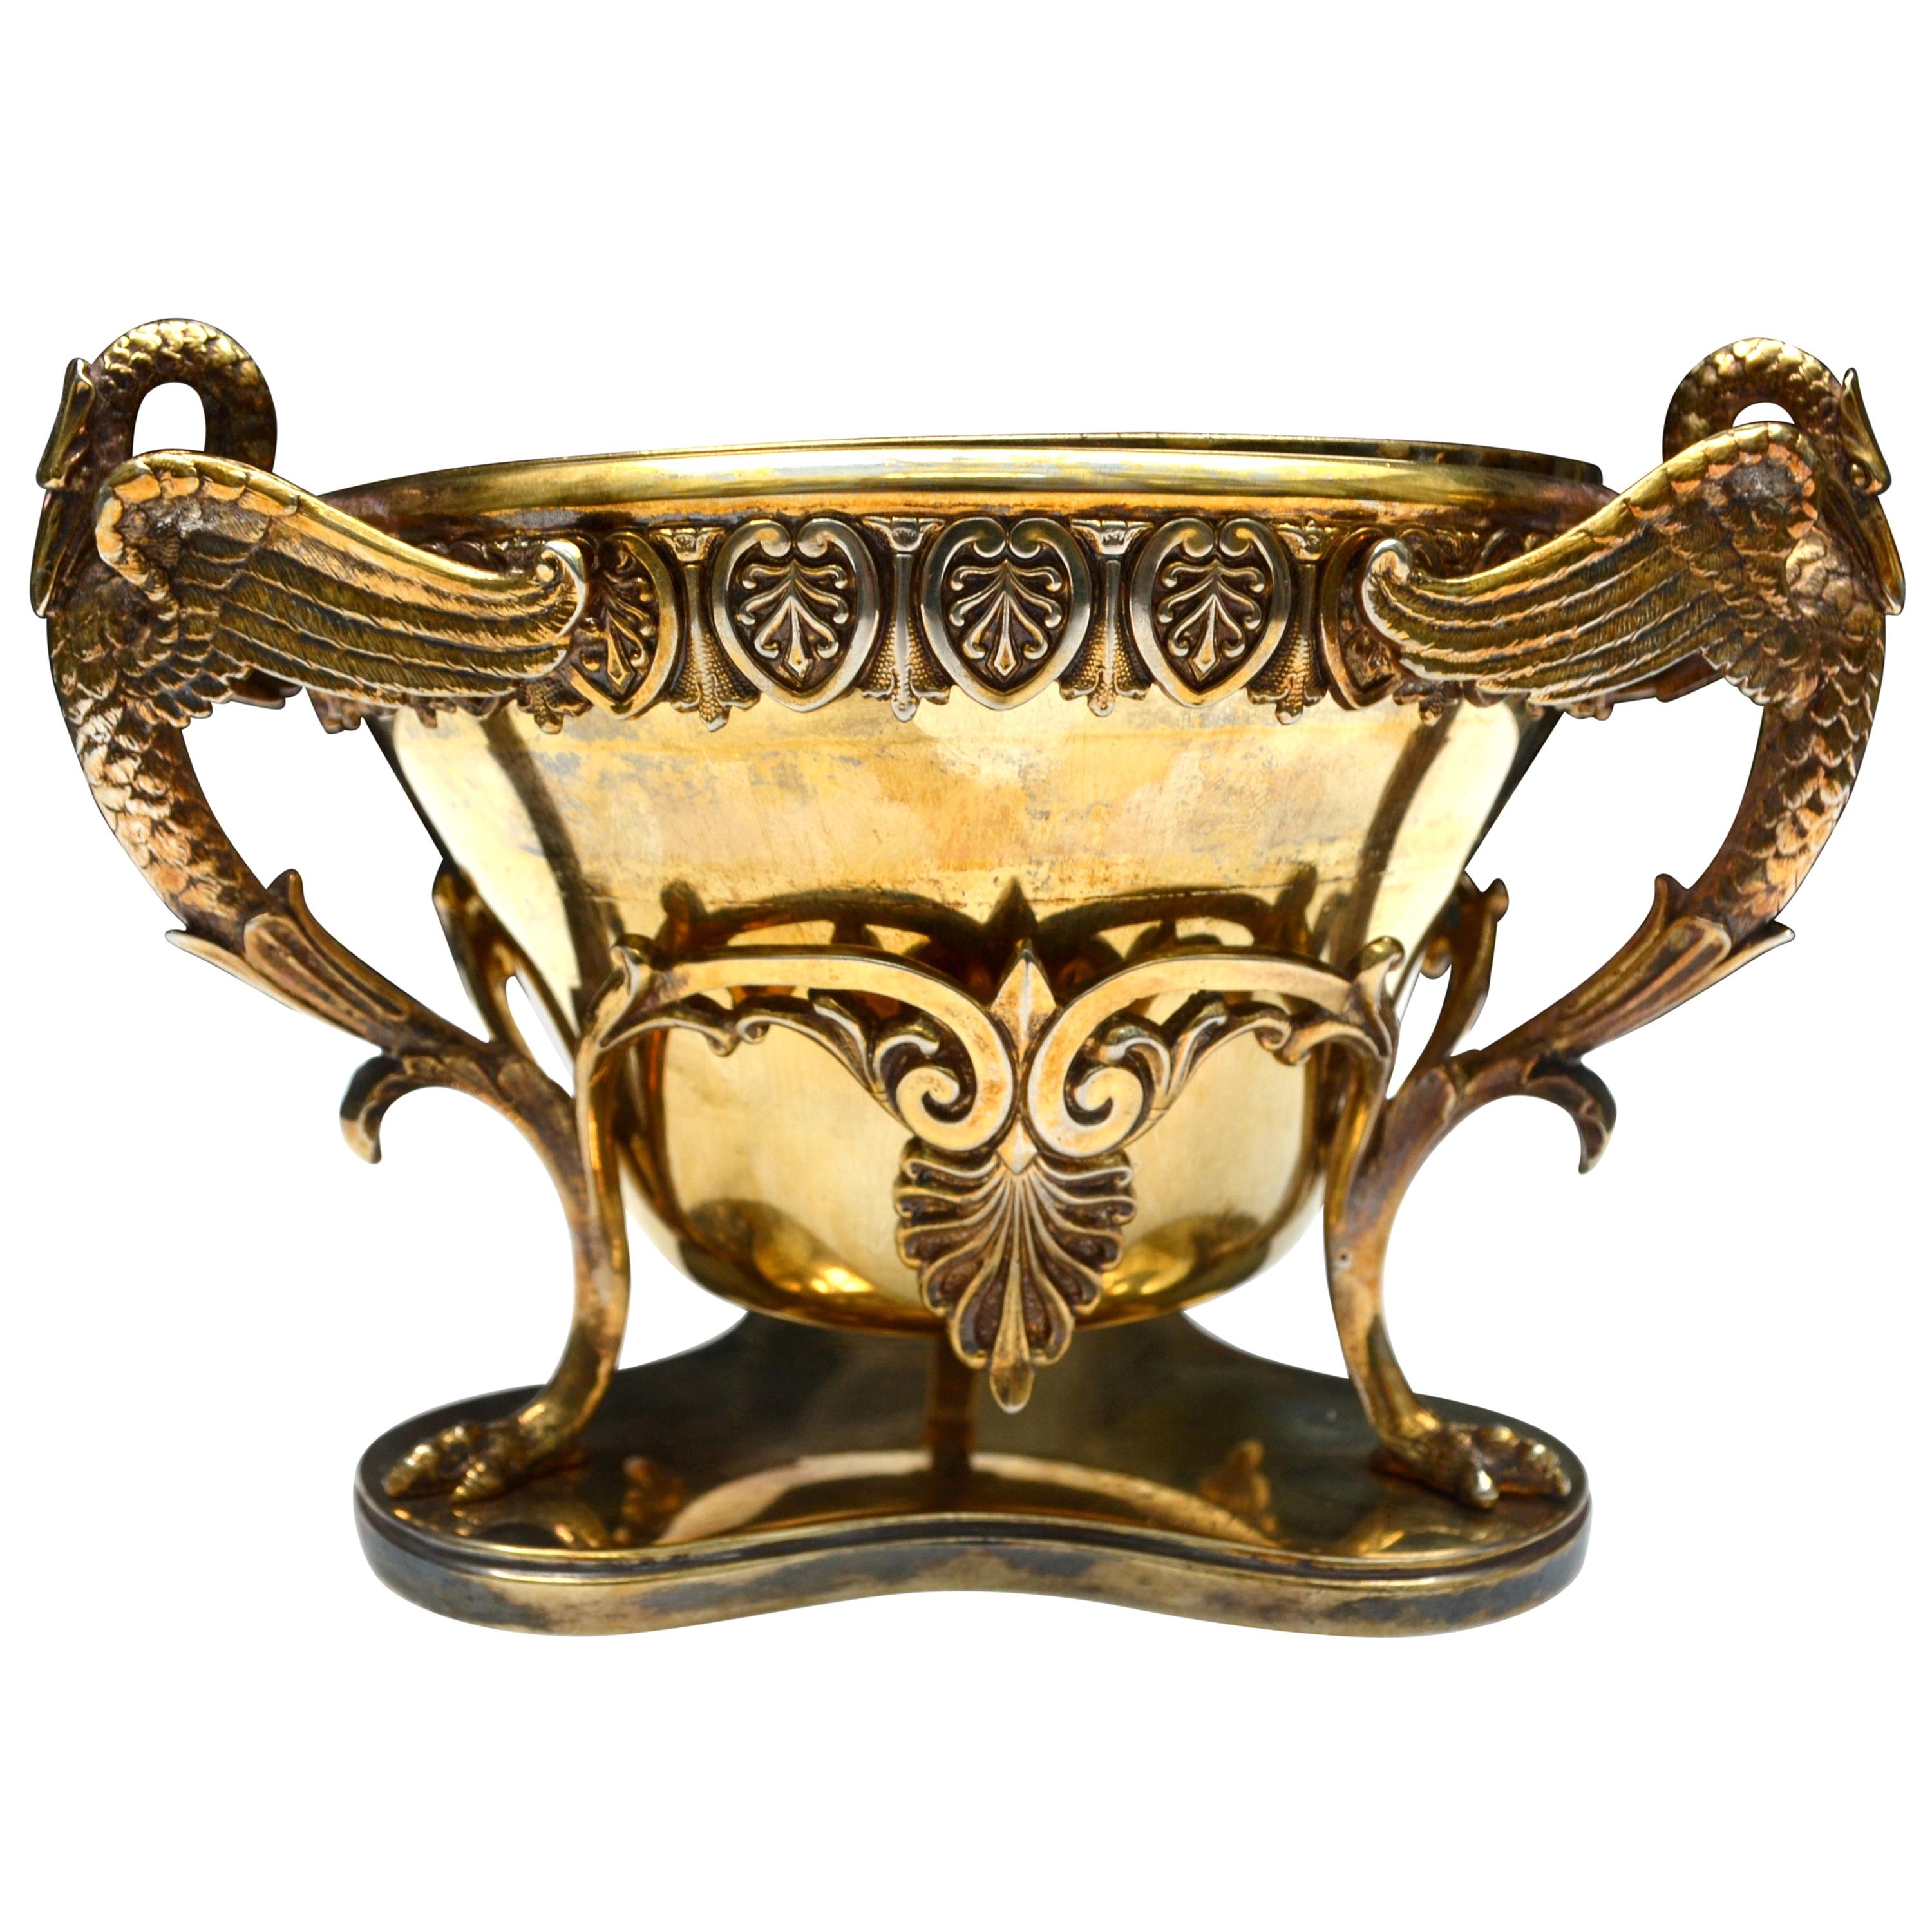 French Empire Style Gilded Metal and Silvered Bowl